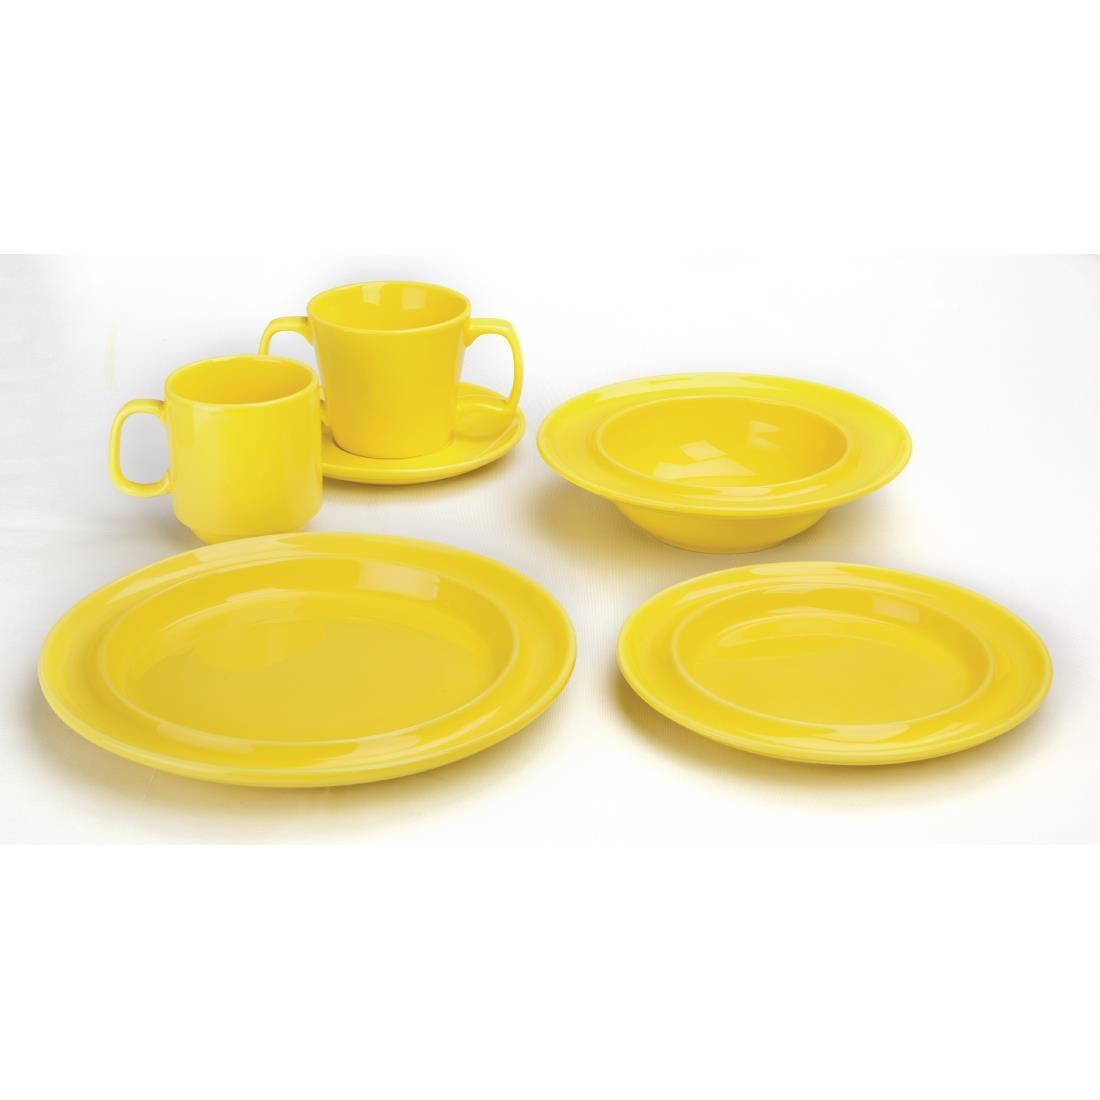 Olympia Heritage Raised Rim Plates Yellow 203mm (Pack of 4) - DW146  - 5